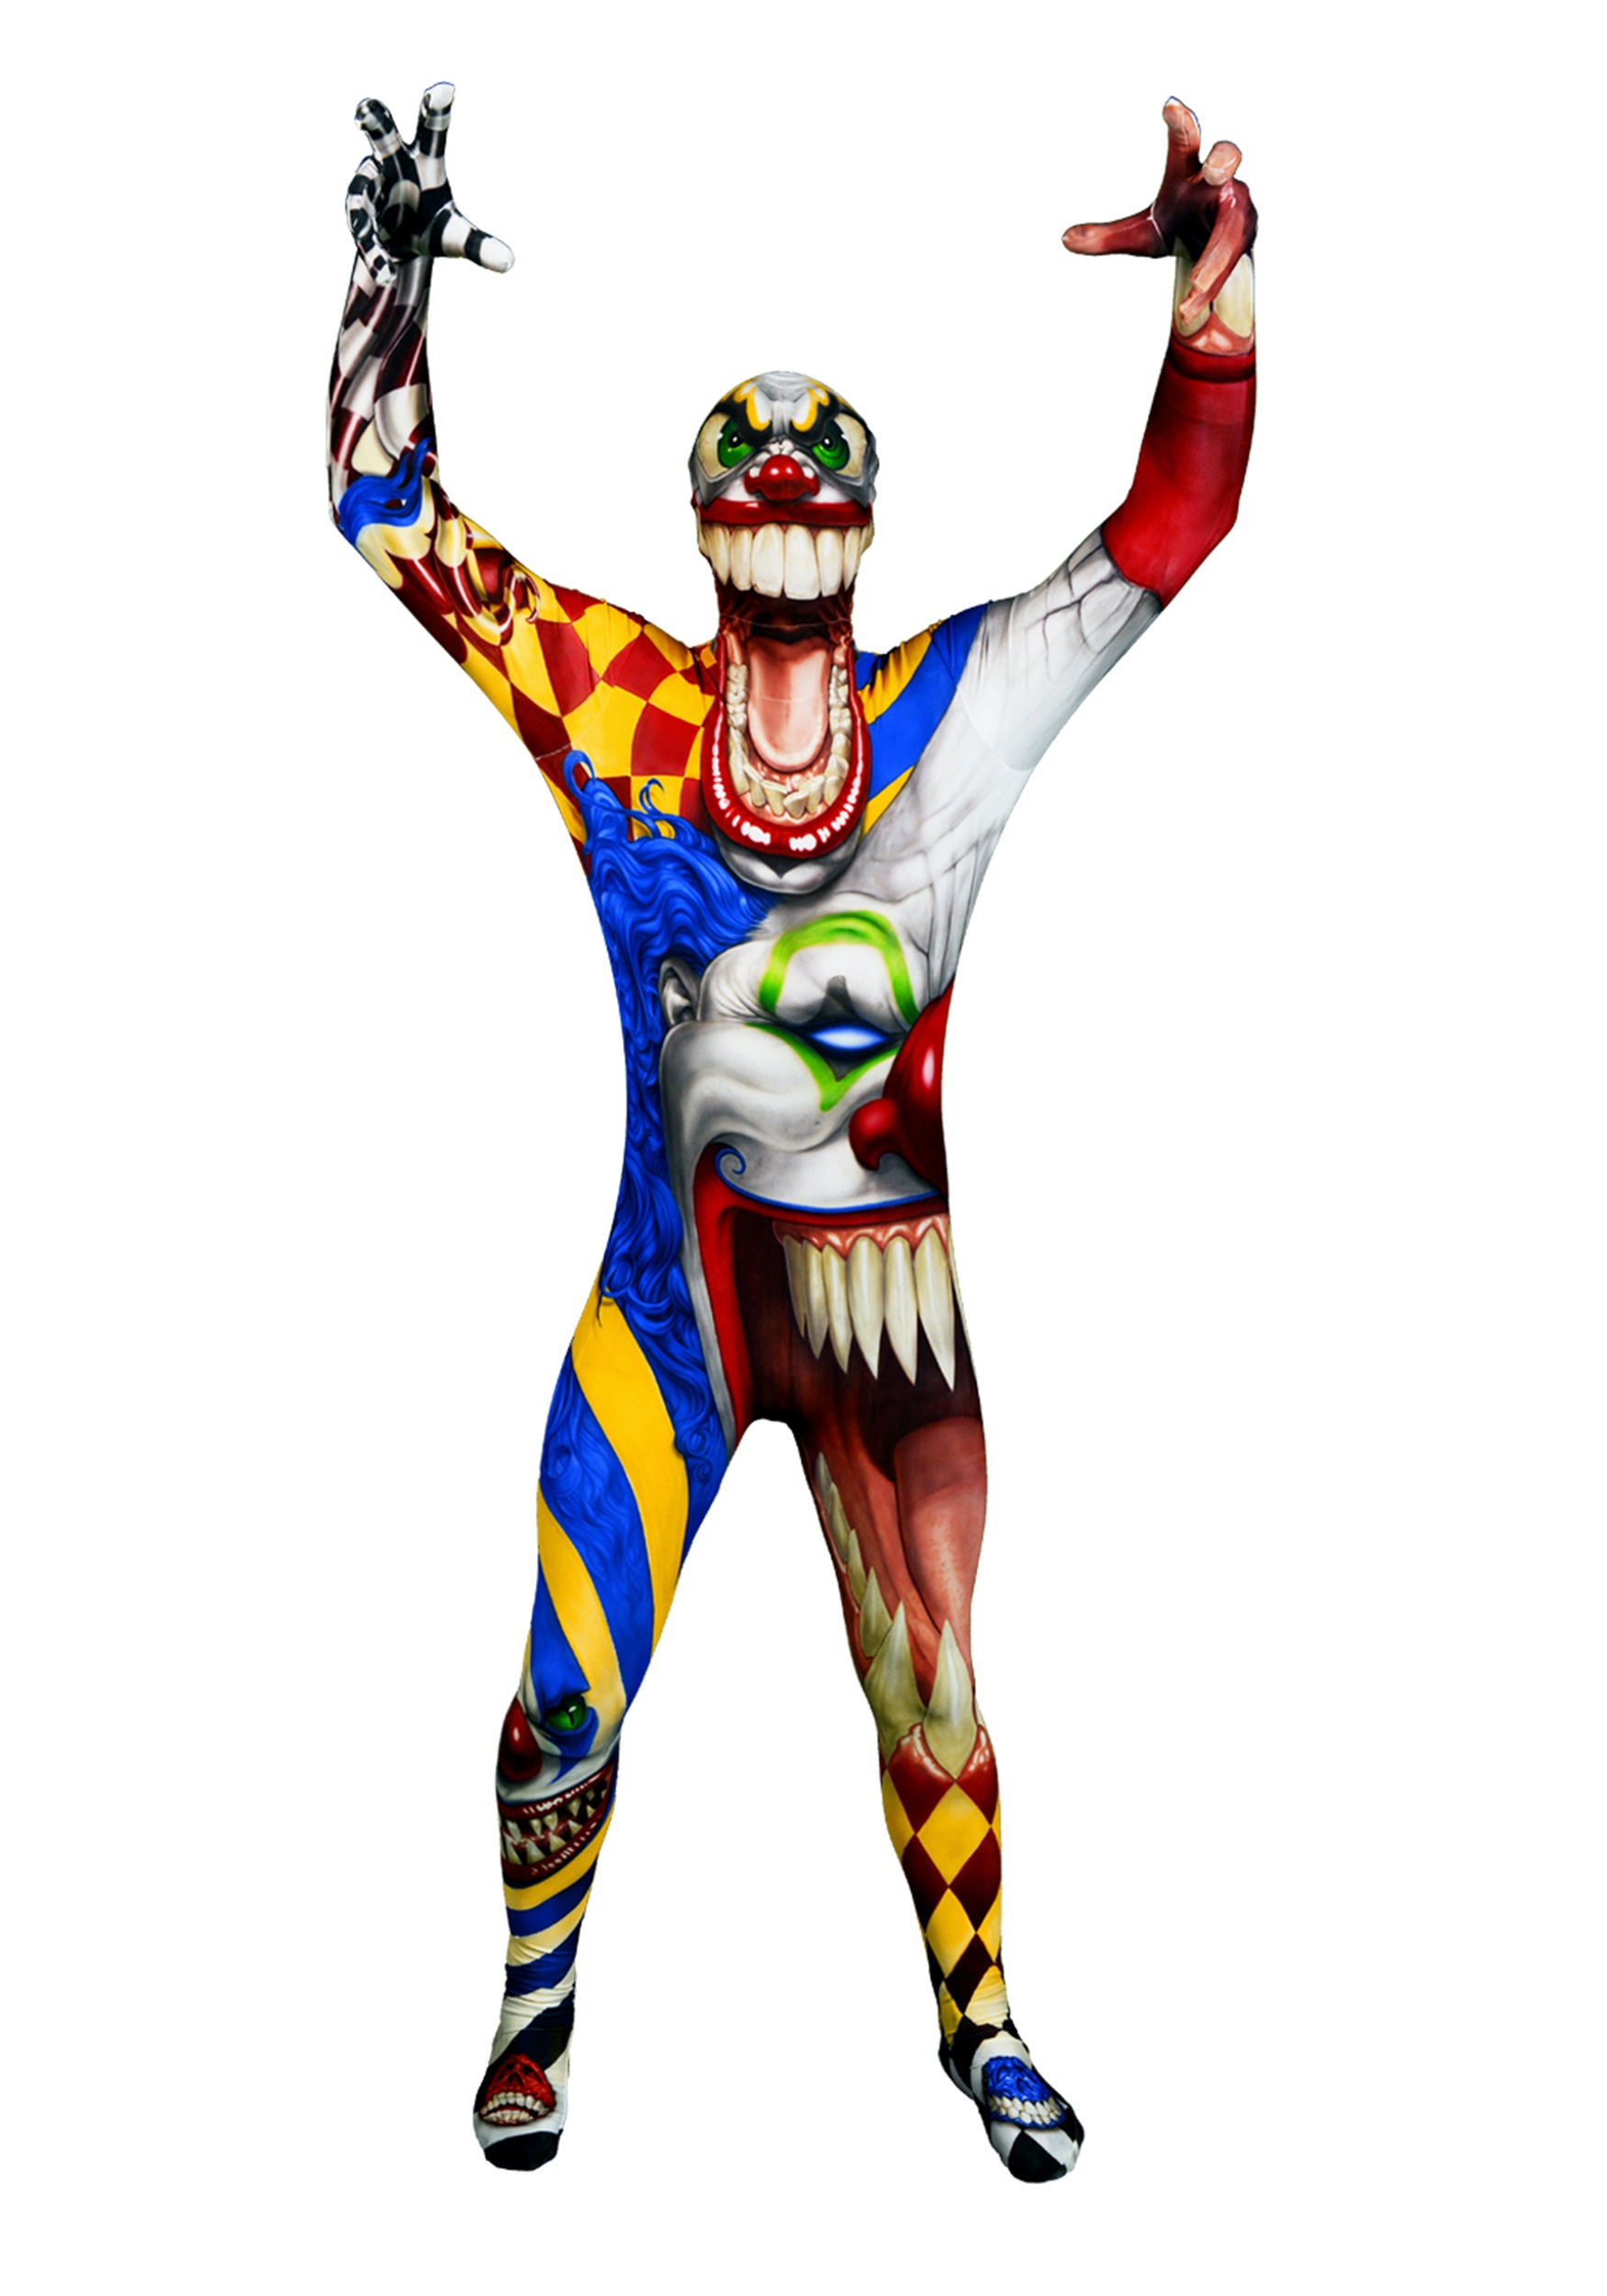 Adult The Clown Costume Morphsuit